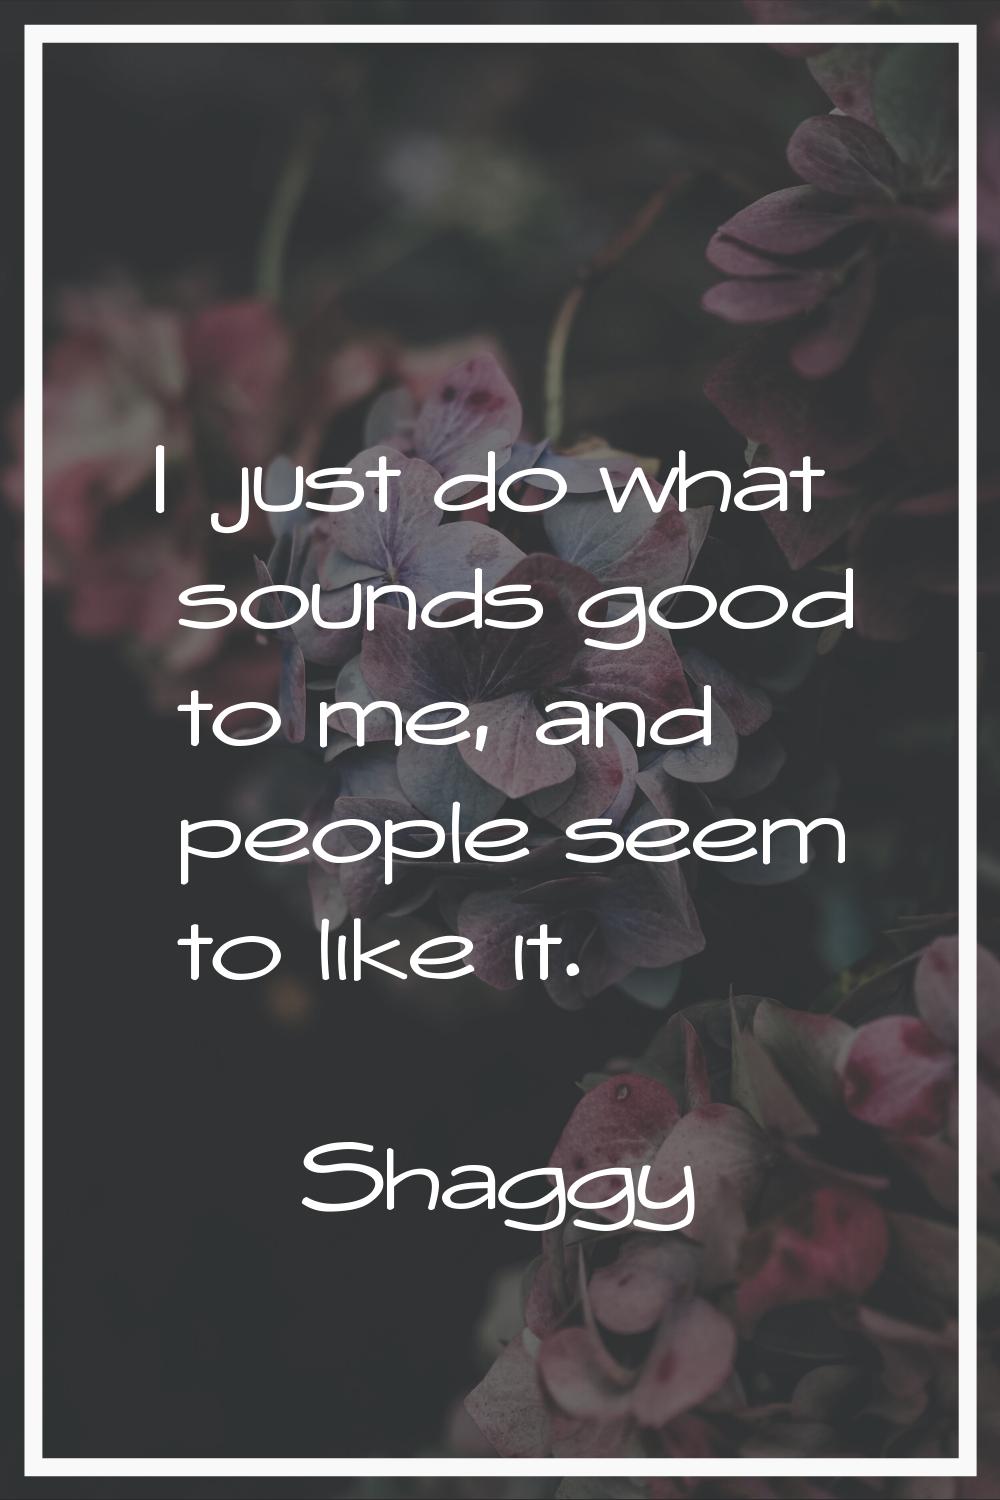 I just do what sounds good to me, and people seem to like it.